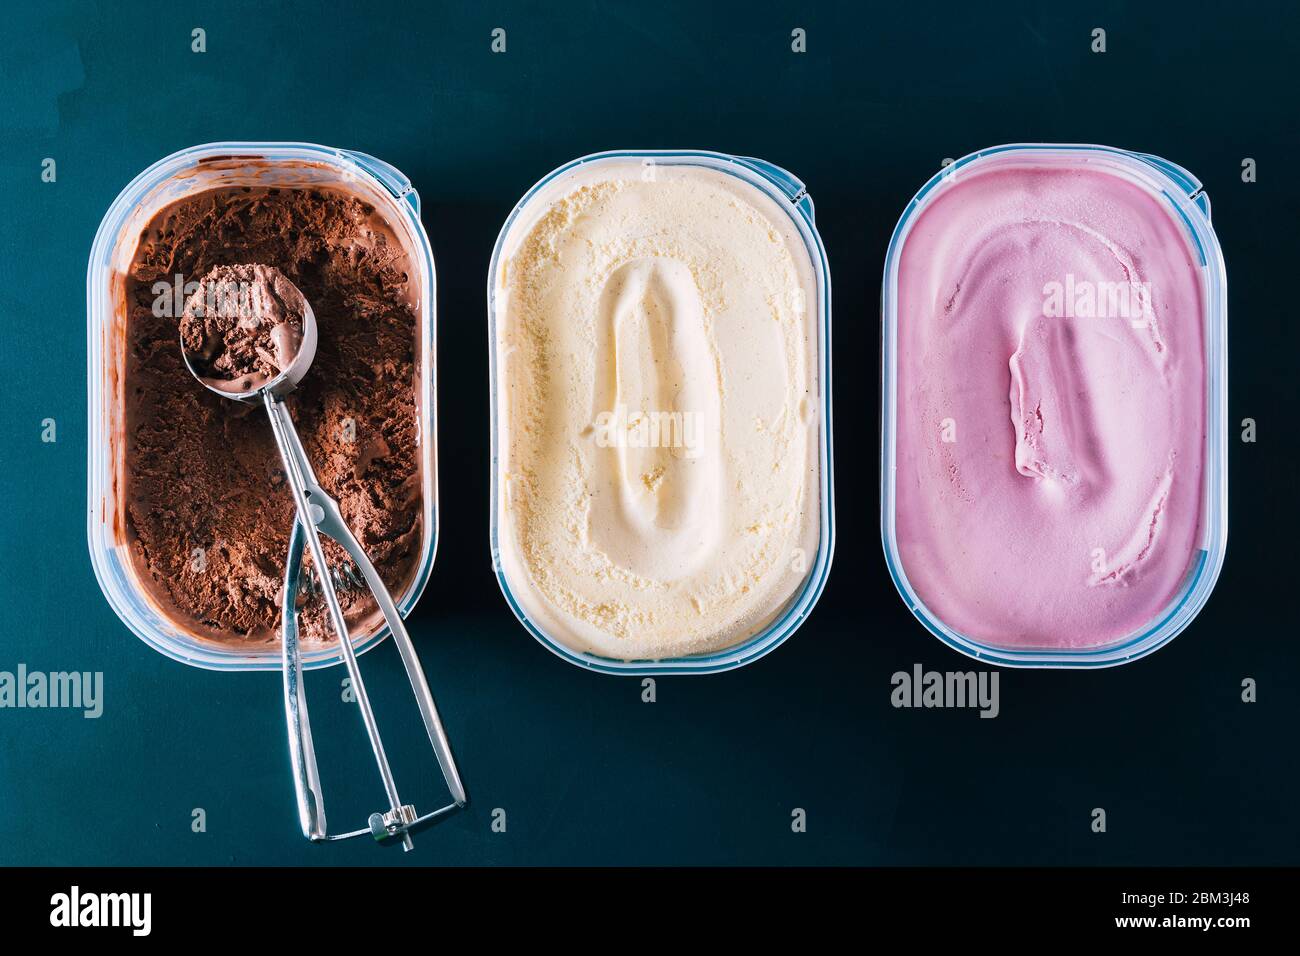 https://c8.alamy.com/comp/2BM3J48/chocolate-vanilla-and-strawberry-ice-cream-tubs-to-prepare-neapolitan-ice-cream-ready-to-eat-on-a-hot-summer-day-or-as-a-delicious-dessert-2BM3J48.jpg